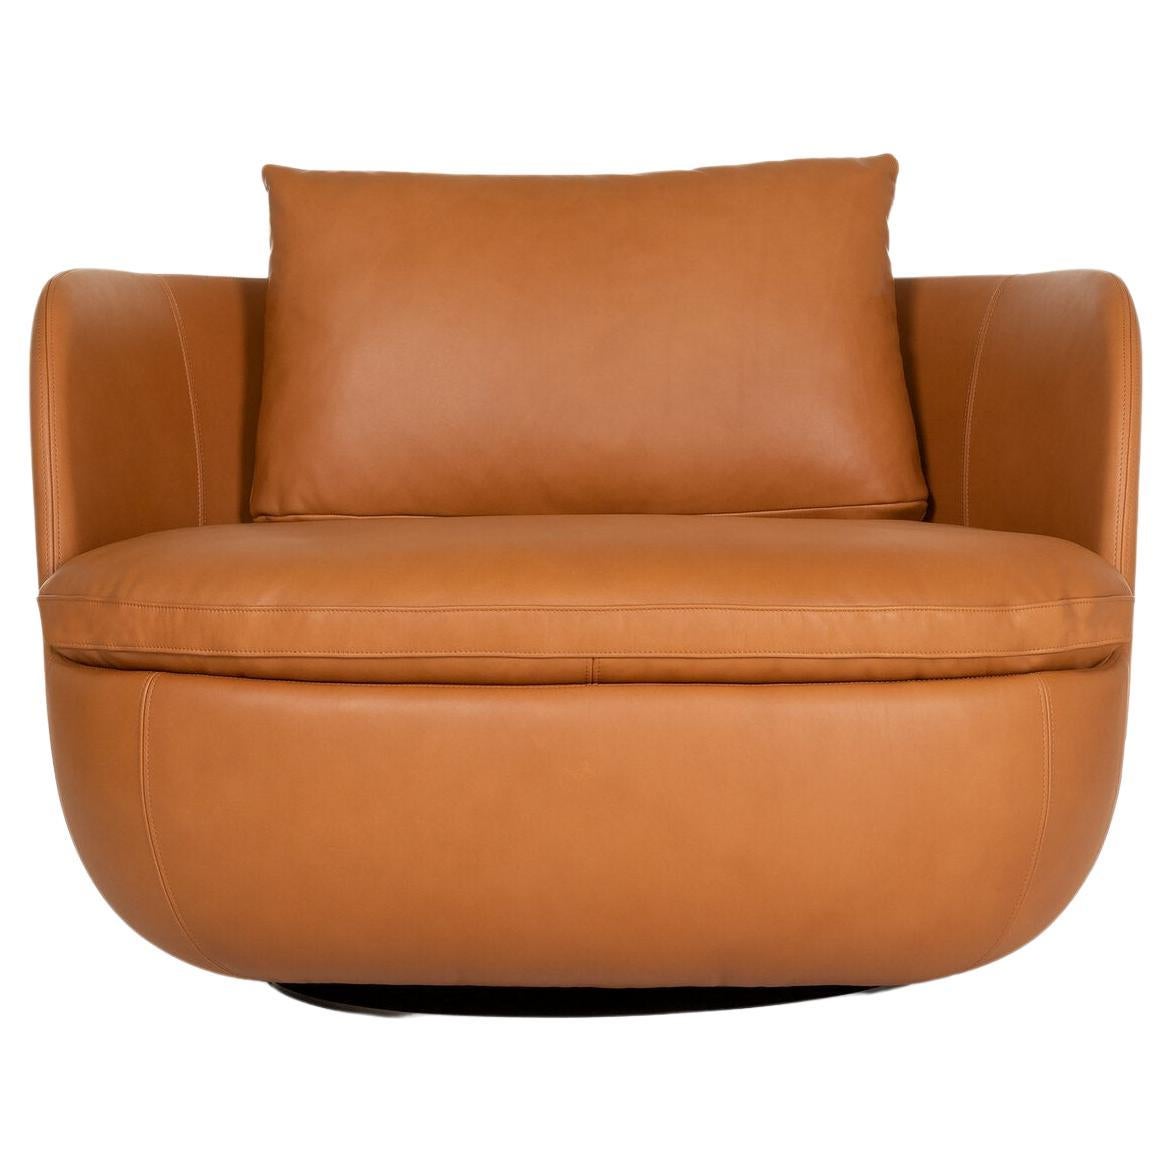 Moooi Bart Swivel Armchair in Foam Seat with Shade Ochre 20291 Upholstery For Sale